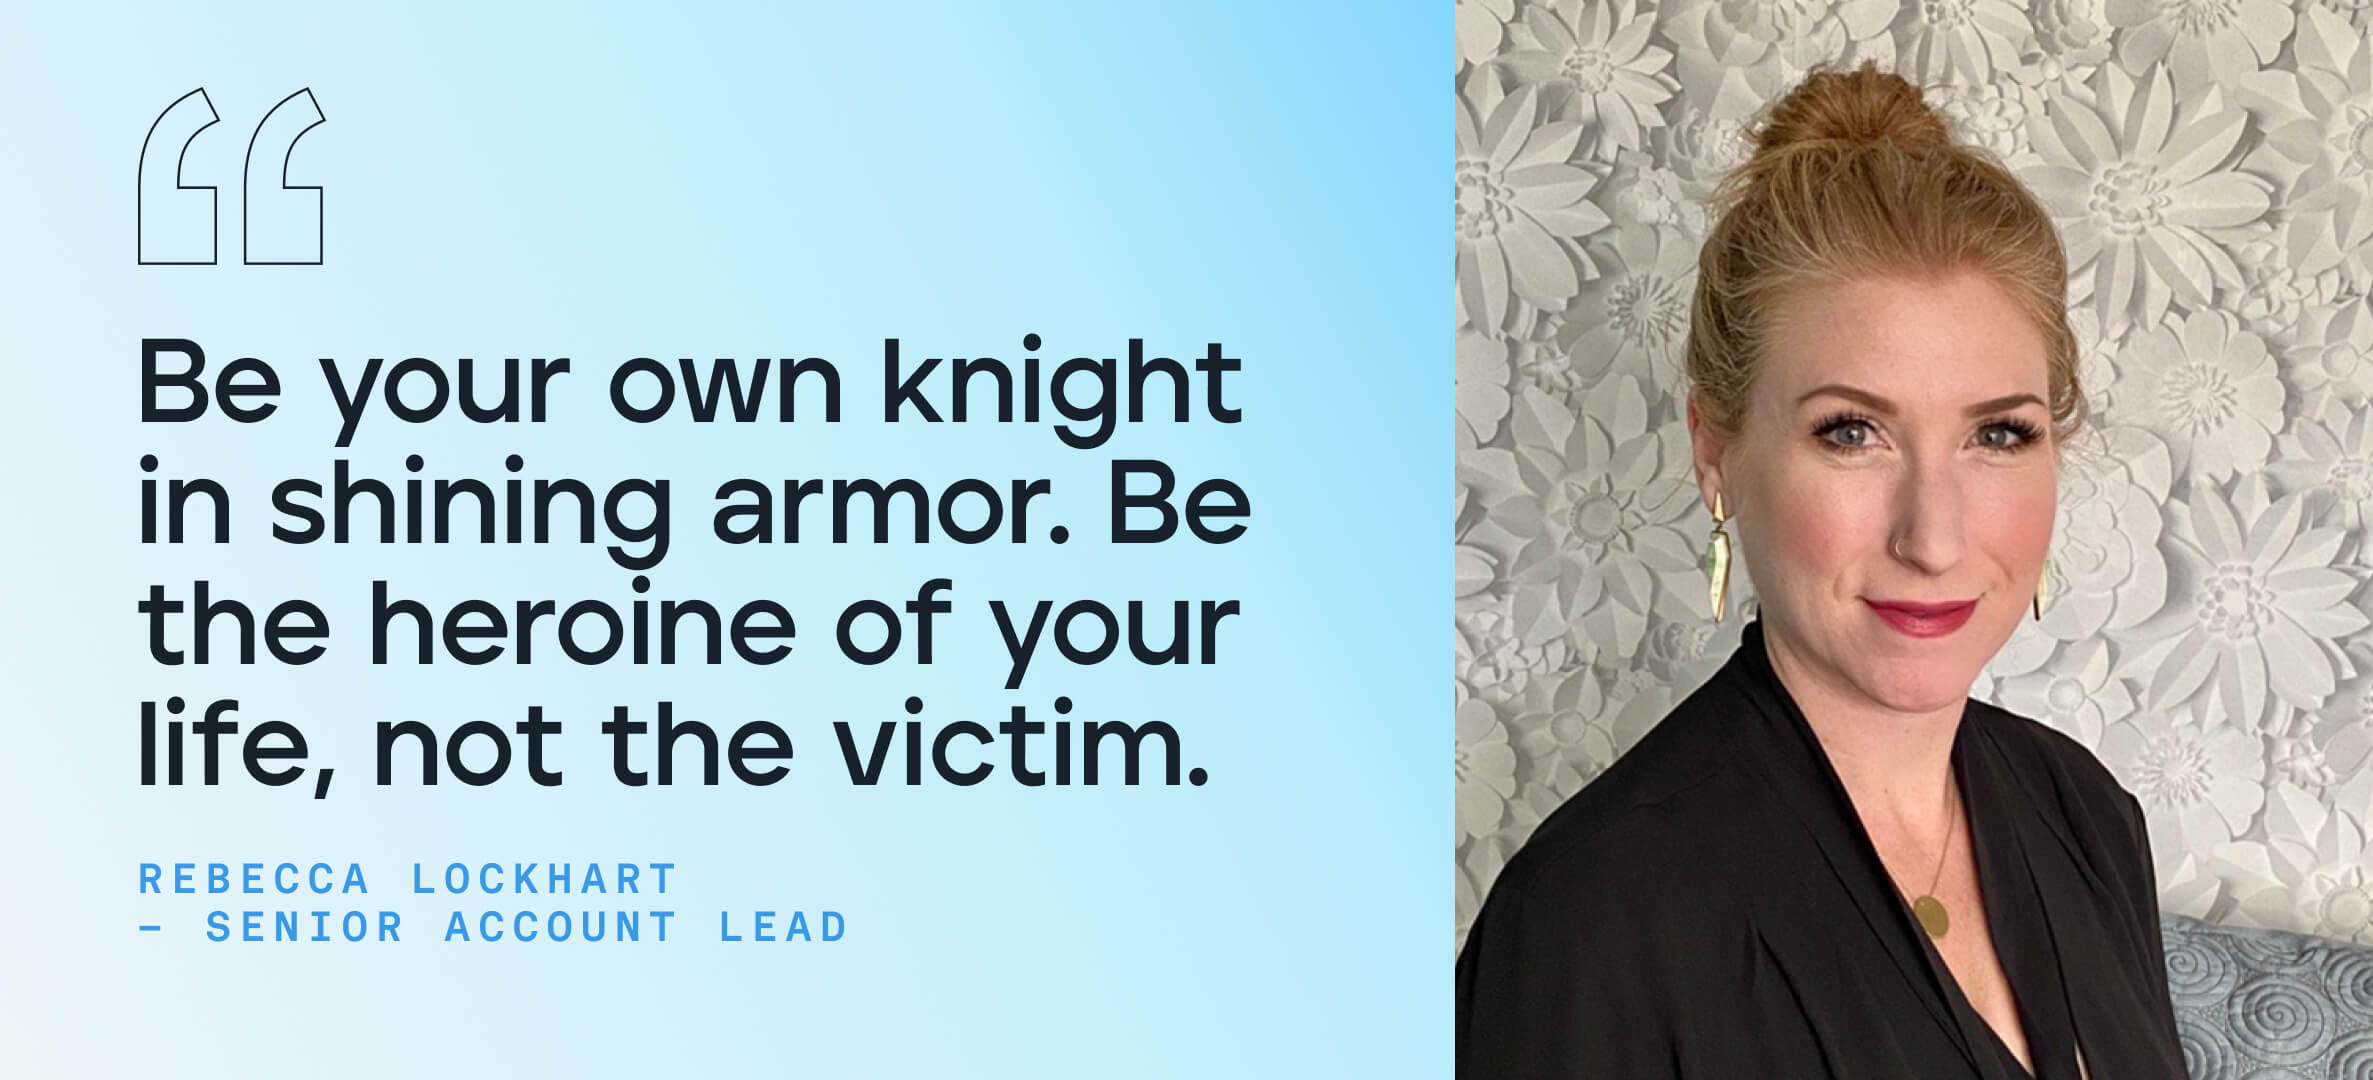 Be your own knight in shining armor. Be the heroine of your life, not the victim.